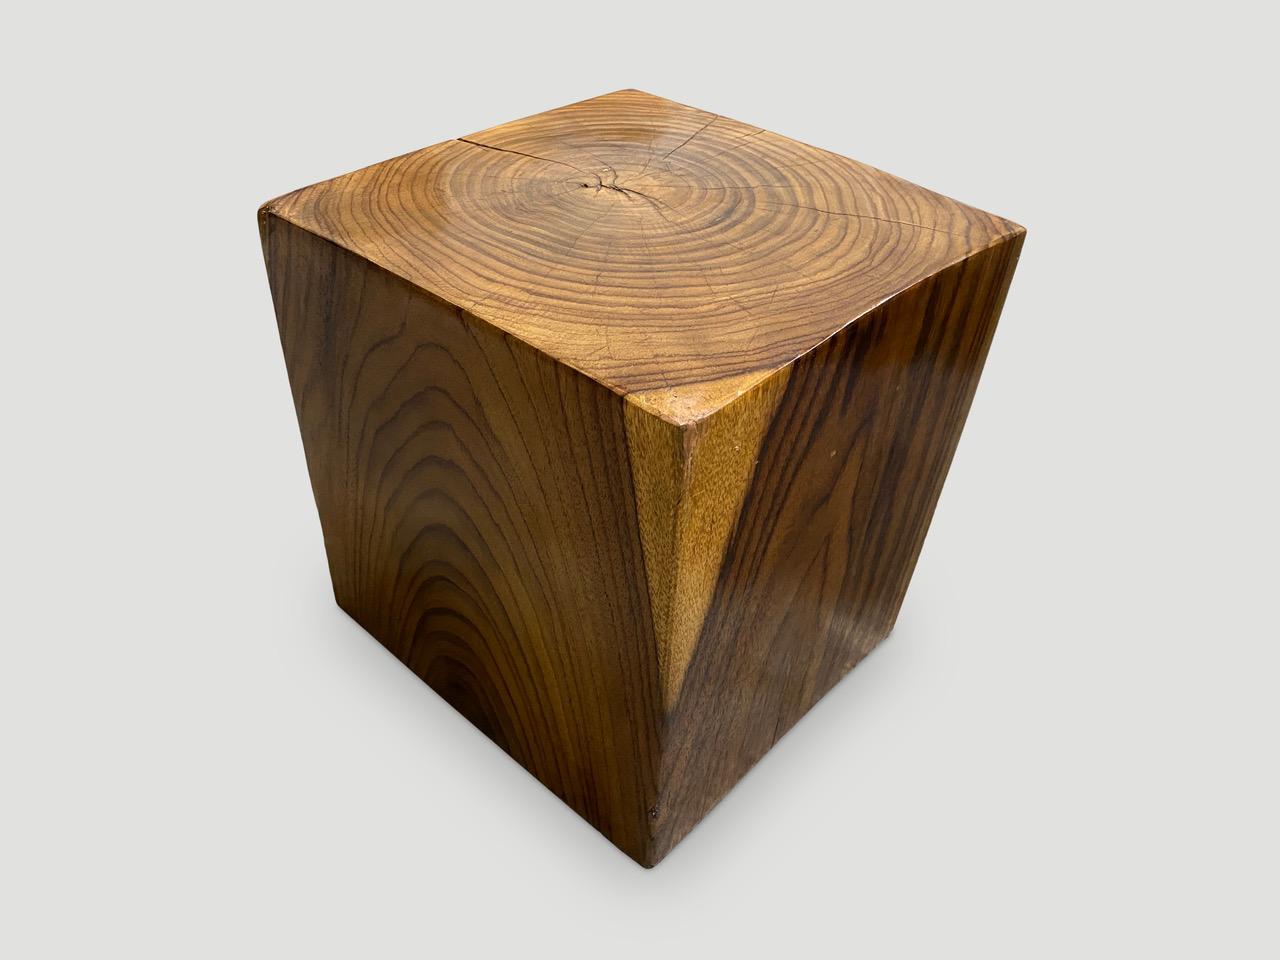 Minimalist sono wood cube. A natural oil finish reveals the beautiful wood grain. We have a collection of three. The price reflects the one shown. 

Own an Andrianna Shamaris original.

Andrianna Shamaris. The Leader In Modern Organic Design.